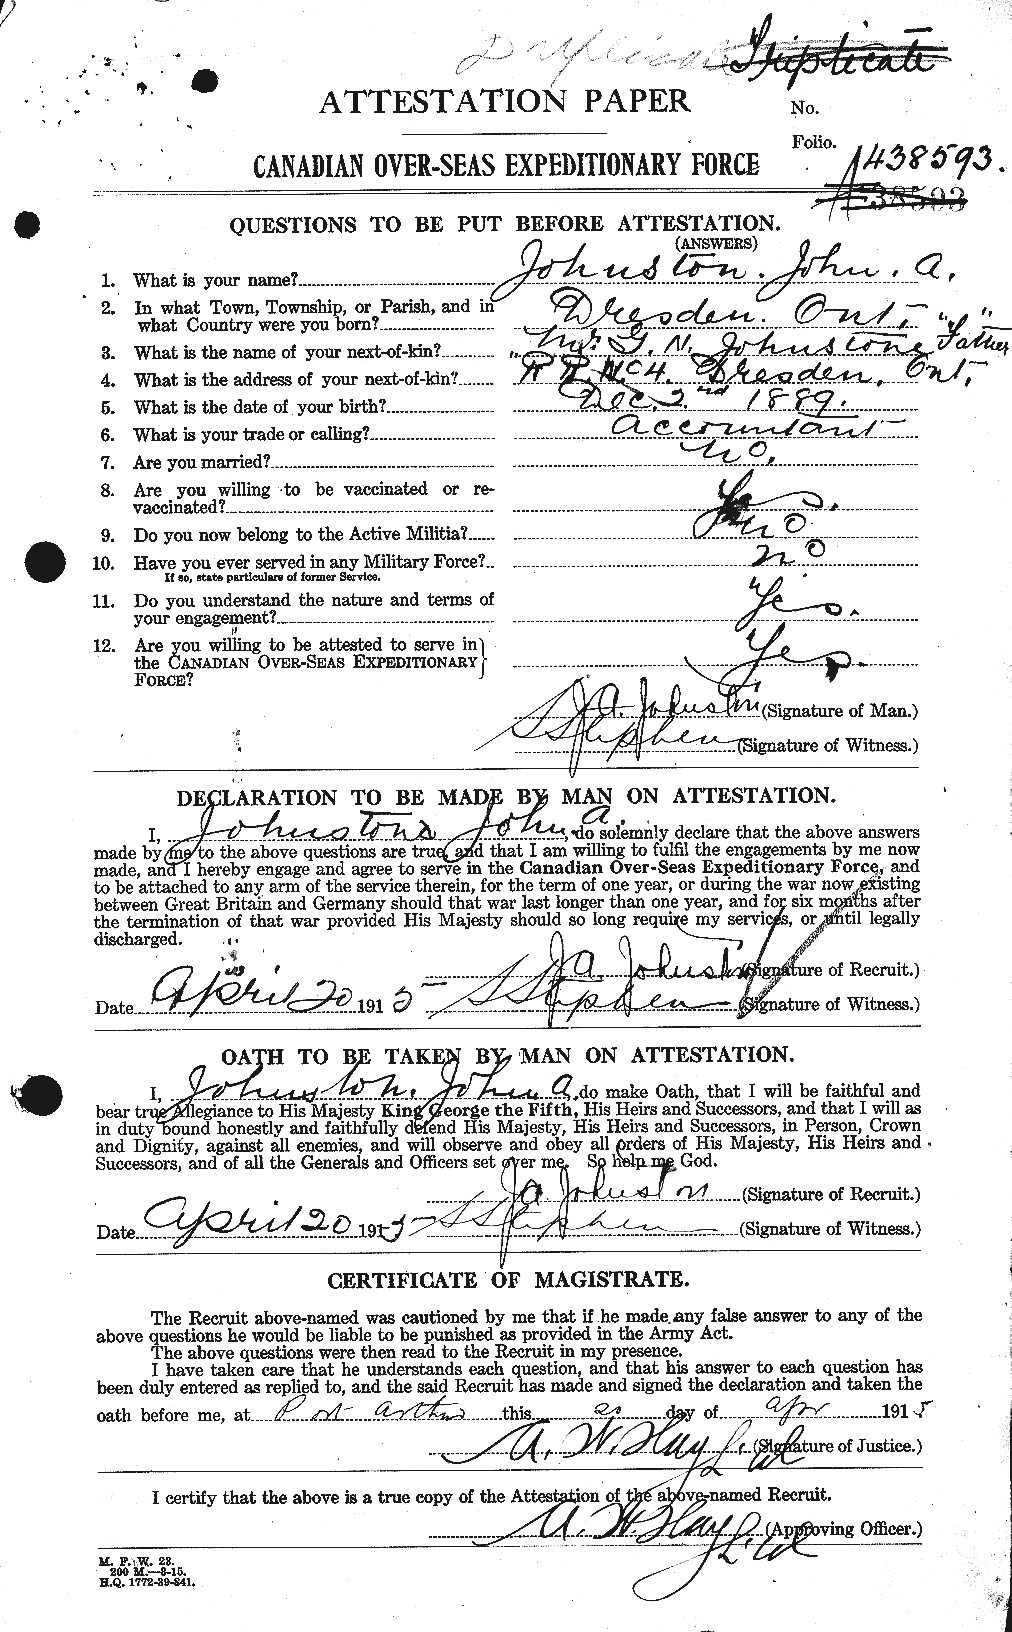 Personnel Records of the First World War - CEF 422803a